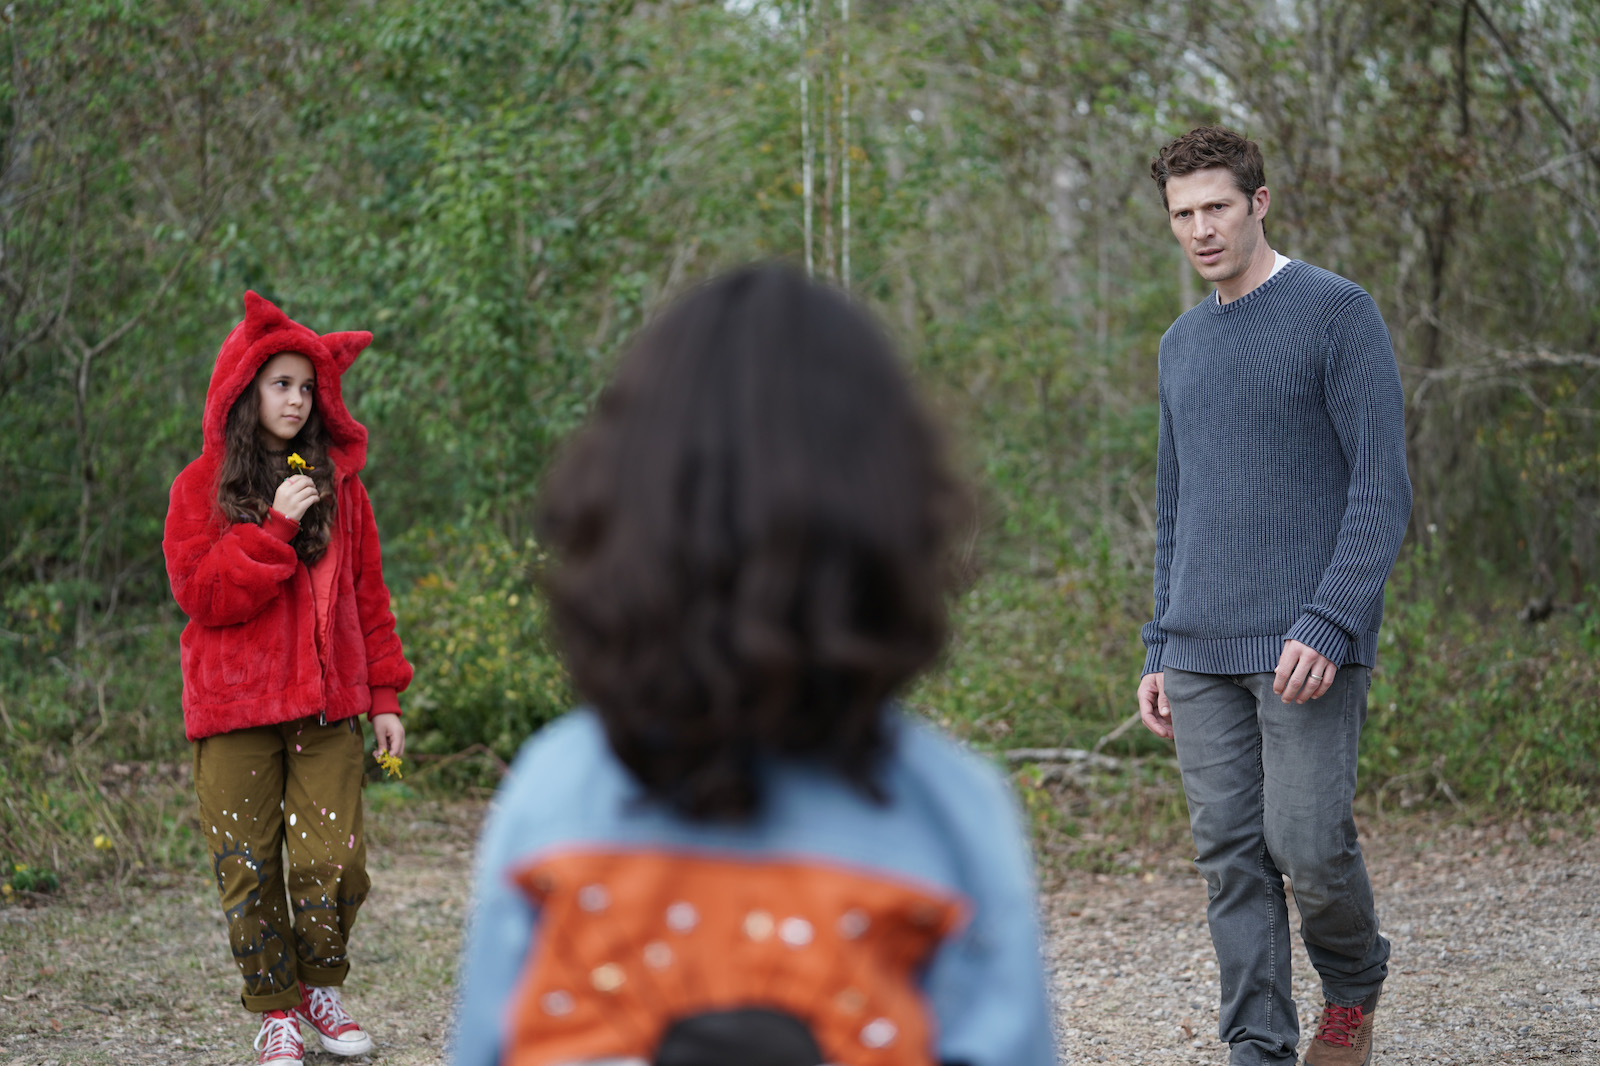 (L - R) Briella Guiza as Lucy and Zach Gilford as Ben in the supernatural horror/thriller, THERE’S SOMETHING WRONG WITH THE CHILDREN, a Paramount Home Entertainment and MGM+ release. Photo courtesy of Sam Lothridge and Blumhouse Television